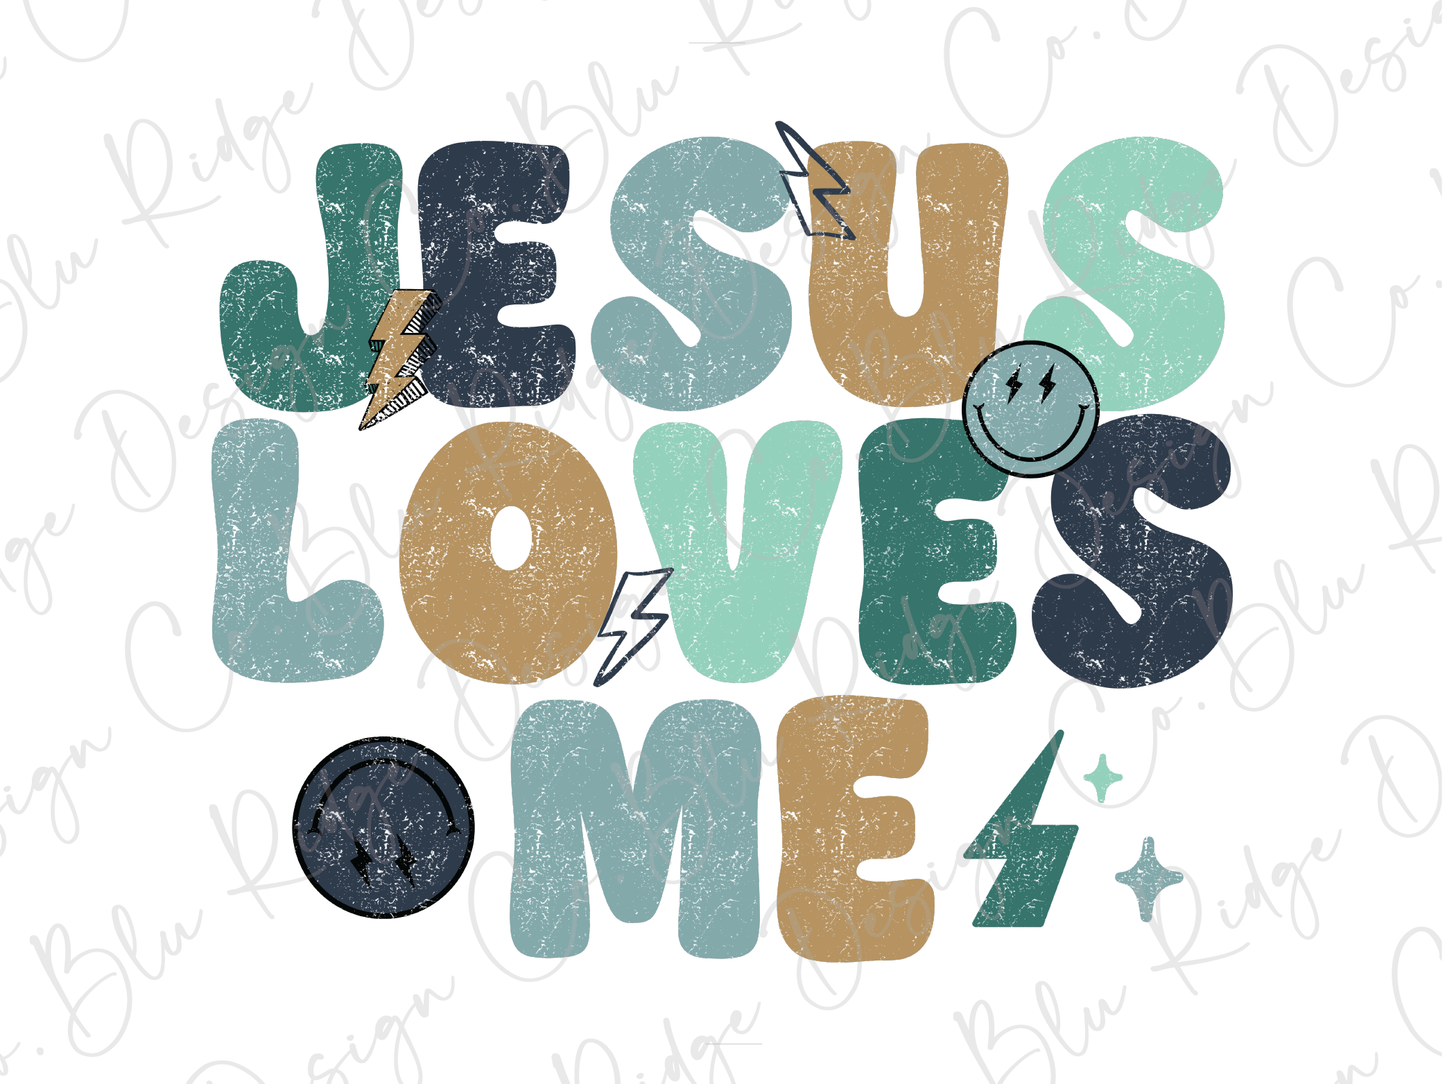 the words jesus loves me are written in different colors